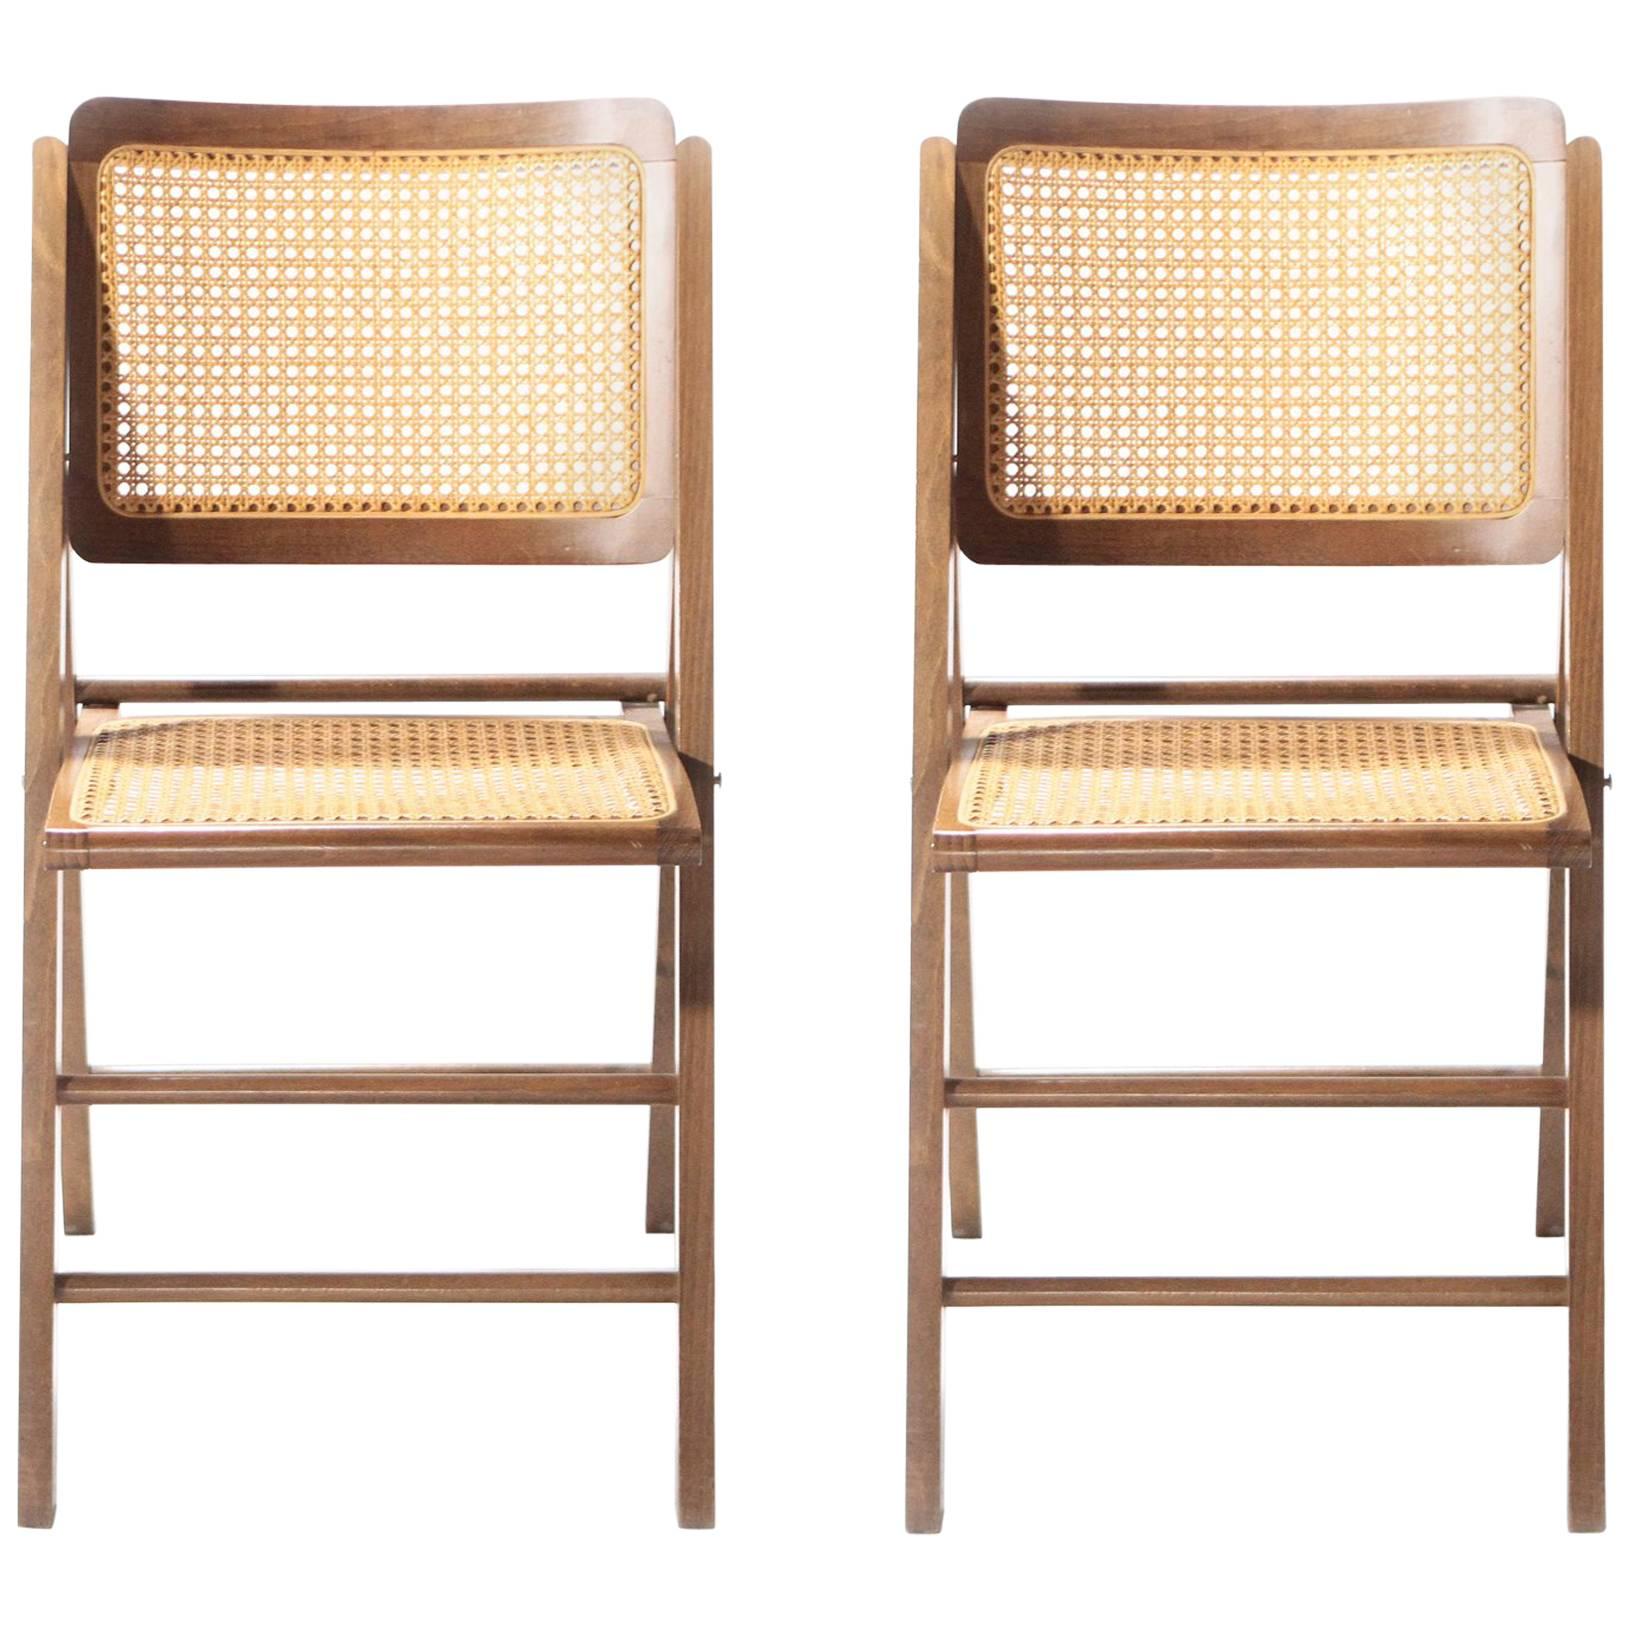 Pair of Caned Folding Chairs, 1950s